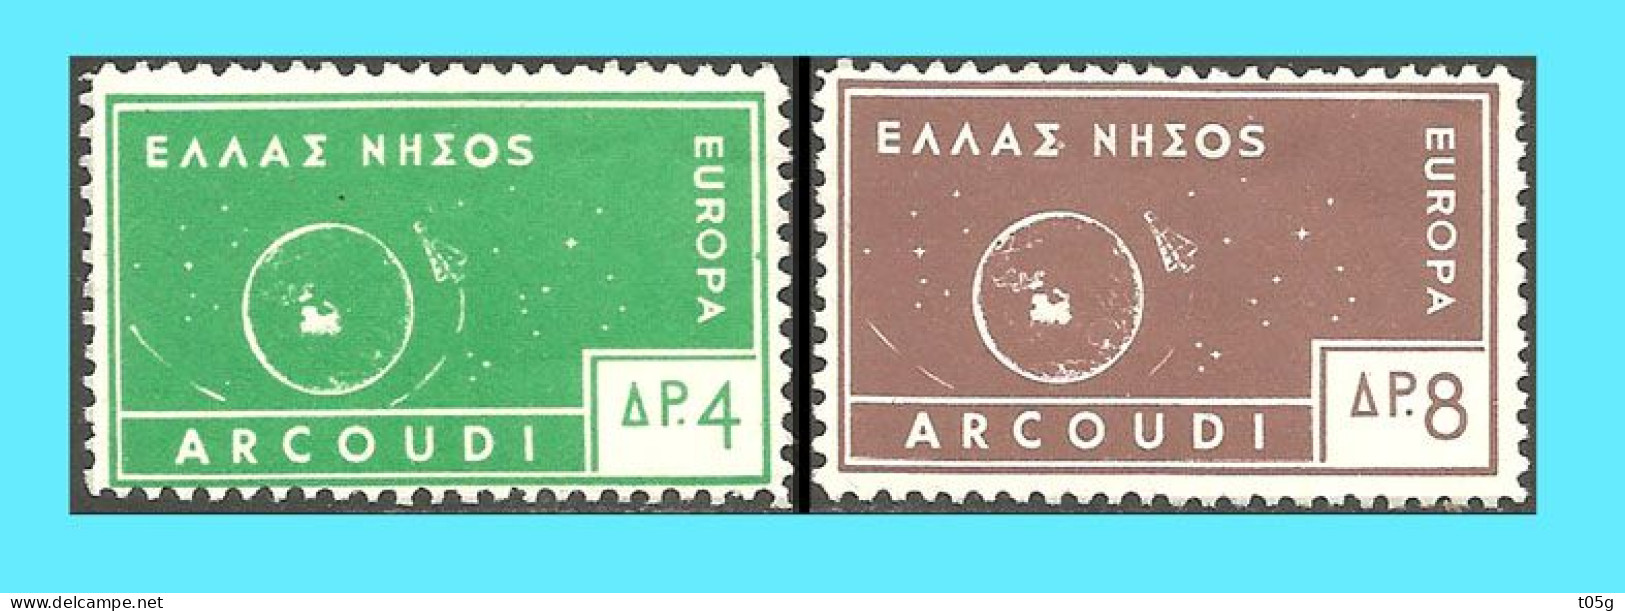 GREECE-GRECE-HELLAS - ITALY- IONIAN  ARCOUDI ISLAND -EUROPA 1963: Unofficial -private Issue - Compl. Set  MNH** - Nuevos